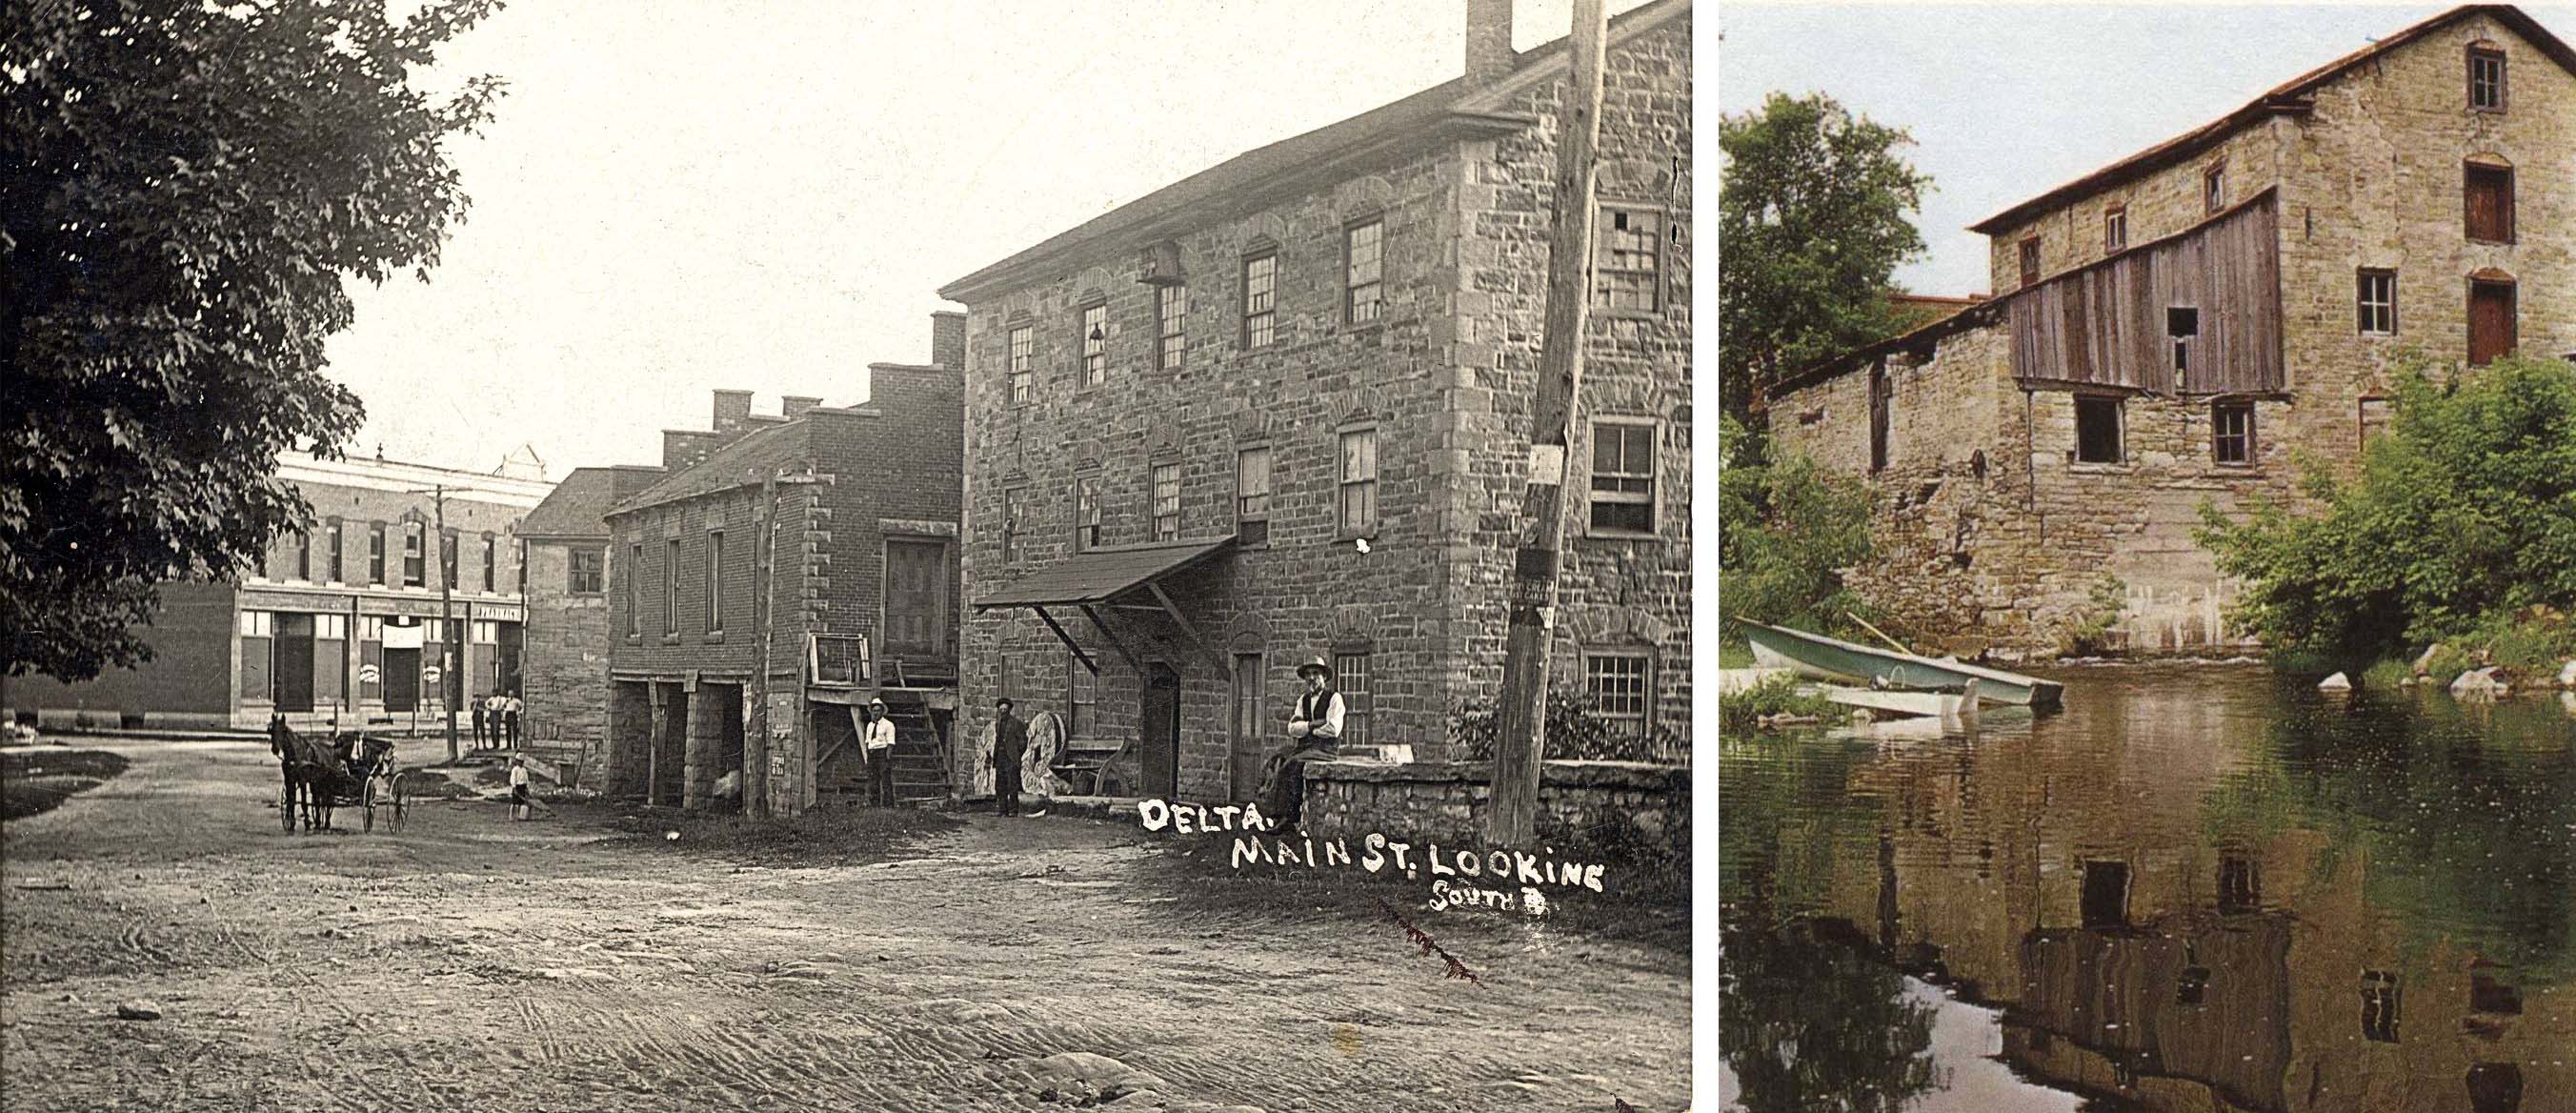 The mill in time. Pictured is historic Delta (left) and the Old Stone Mill in 1970 before its restoration between 1999-2004 (right). Photos courtesy of the Delta Mill Society.